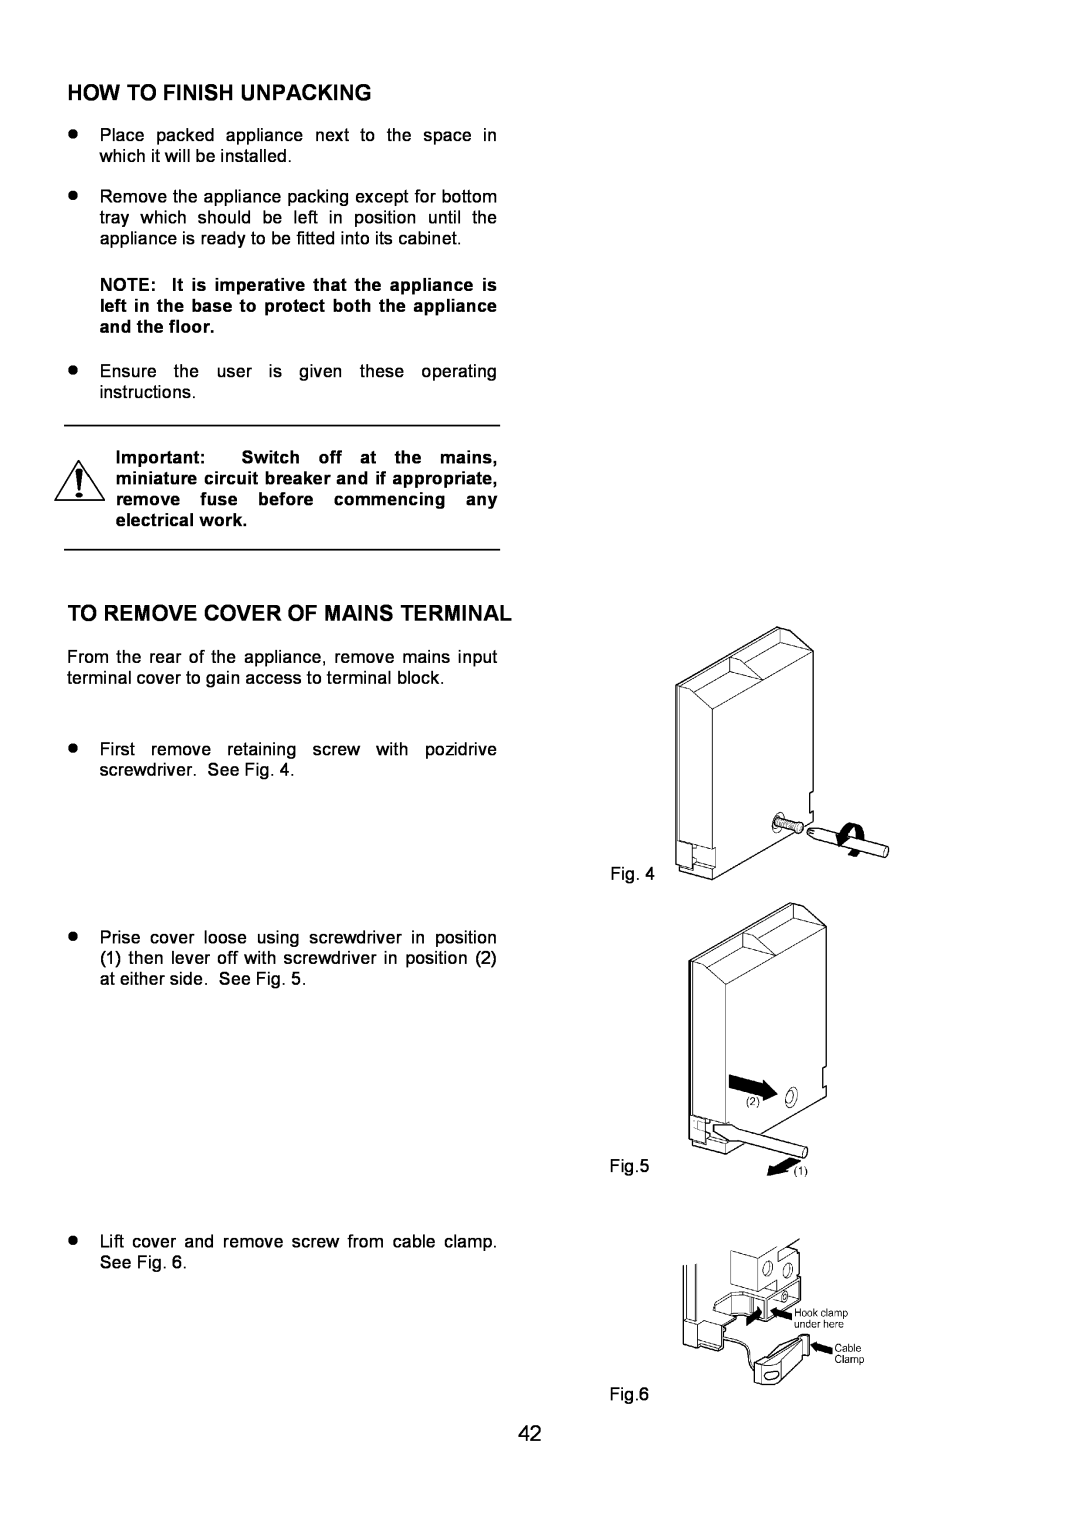 Electrolux D4101-4 operating instructions How To Finish Unpacking, To Remove Cover Of Mains Terminal 